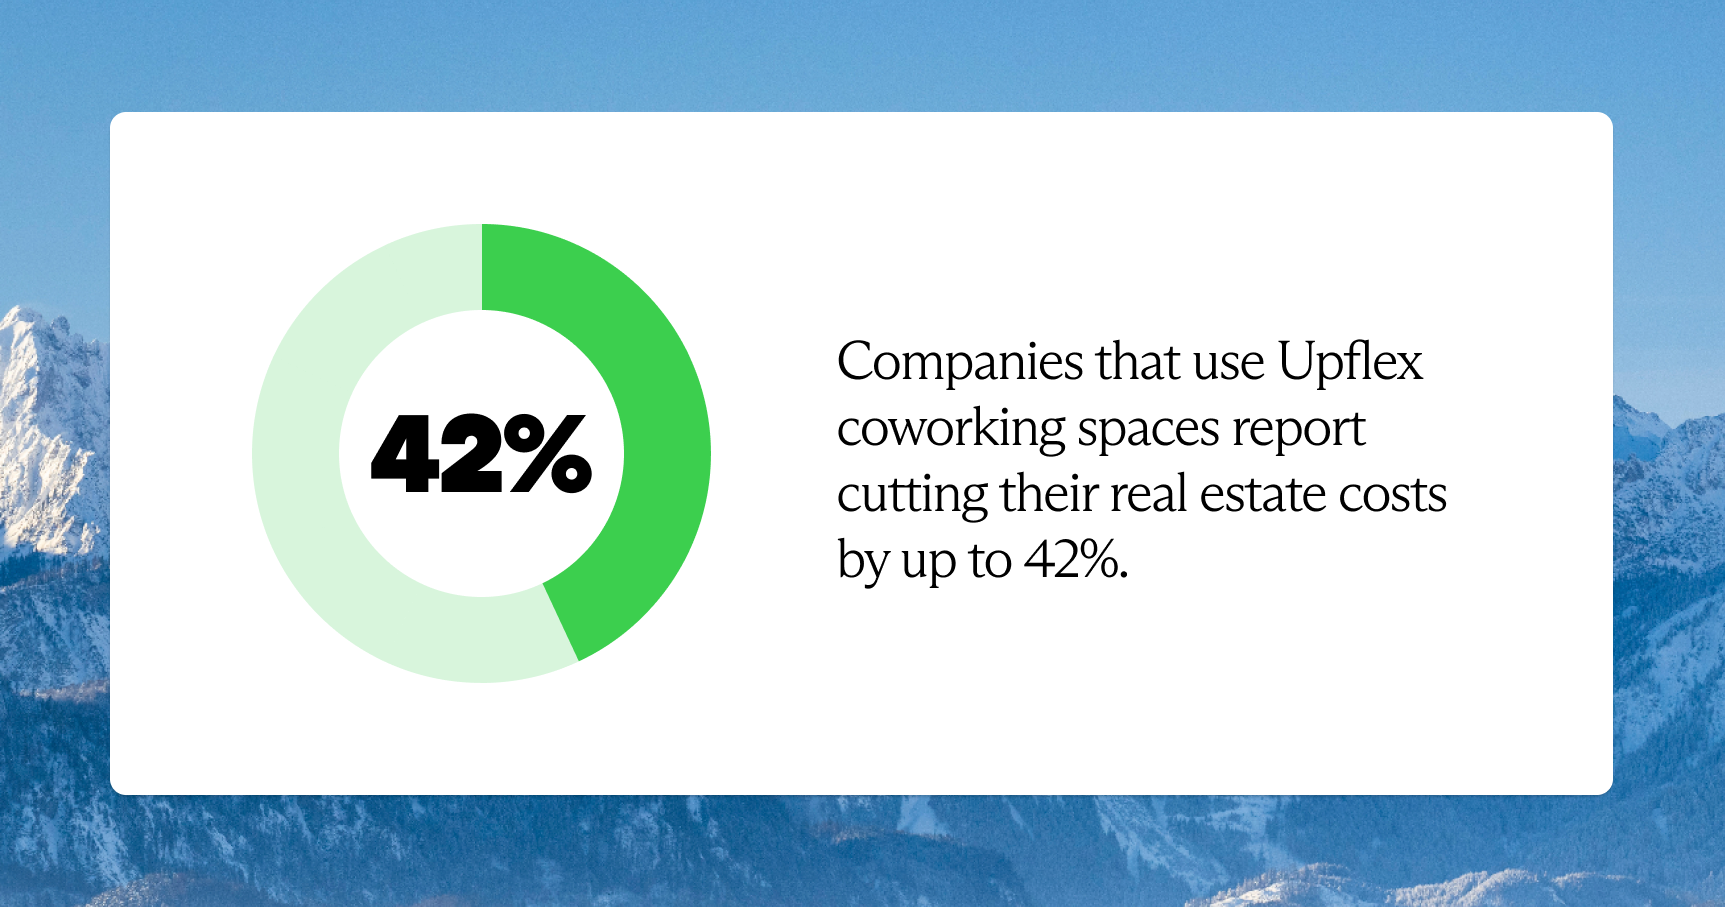 Companies that use Upflex coworking spaces report cutting their real estate costs by up to 42%. 